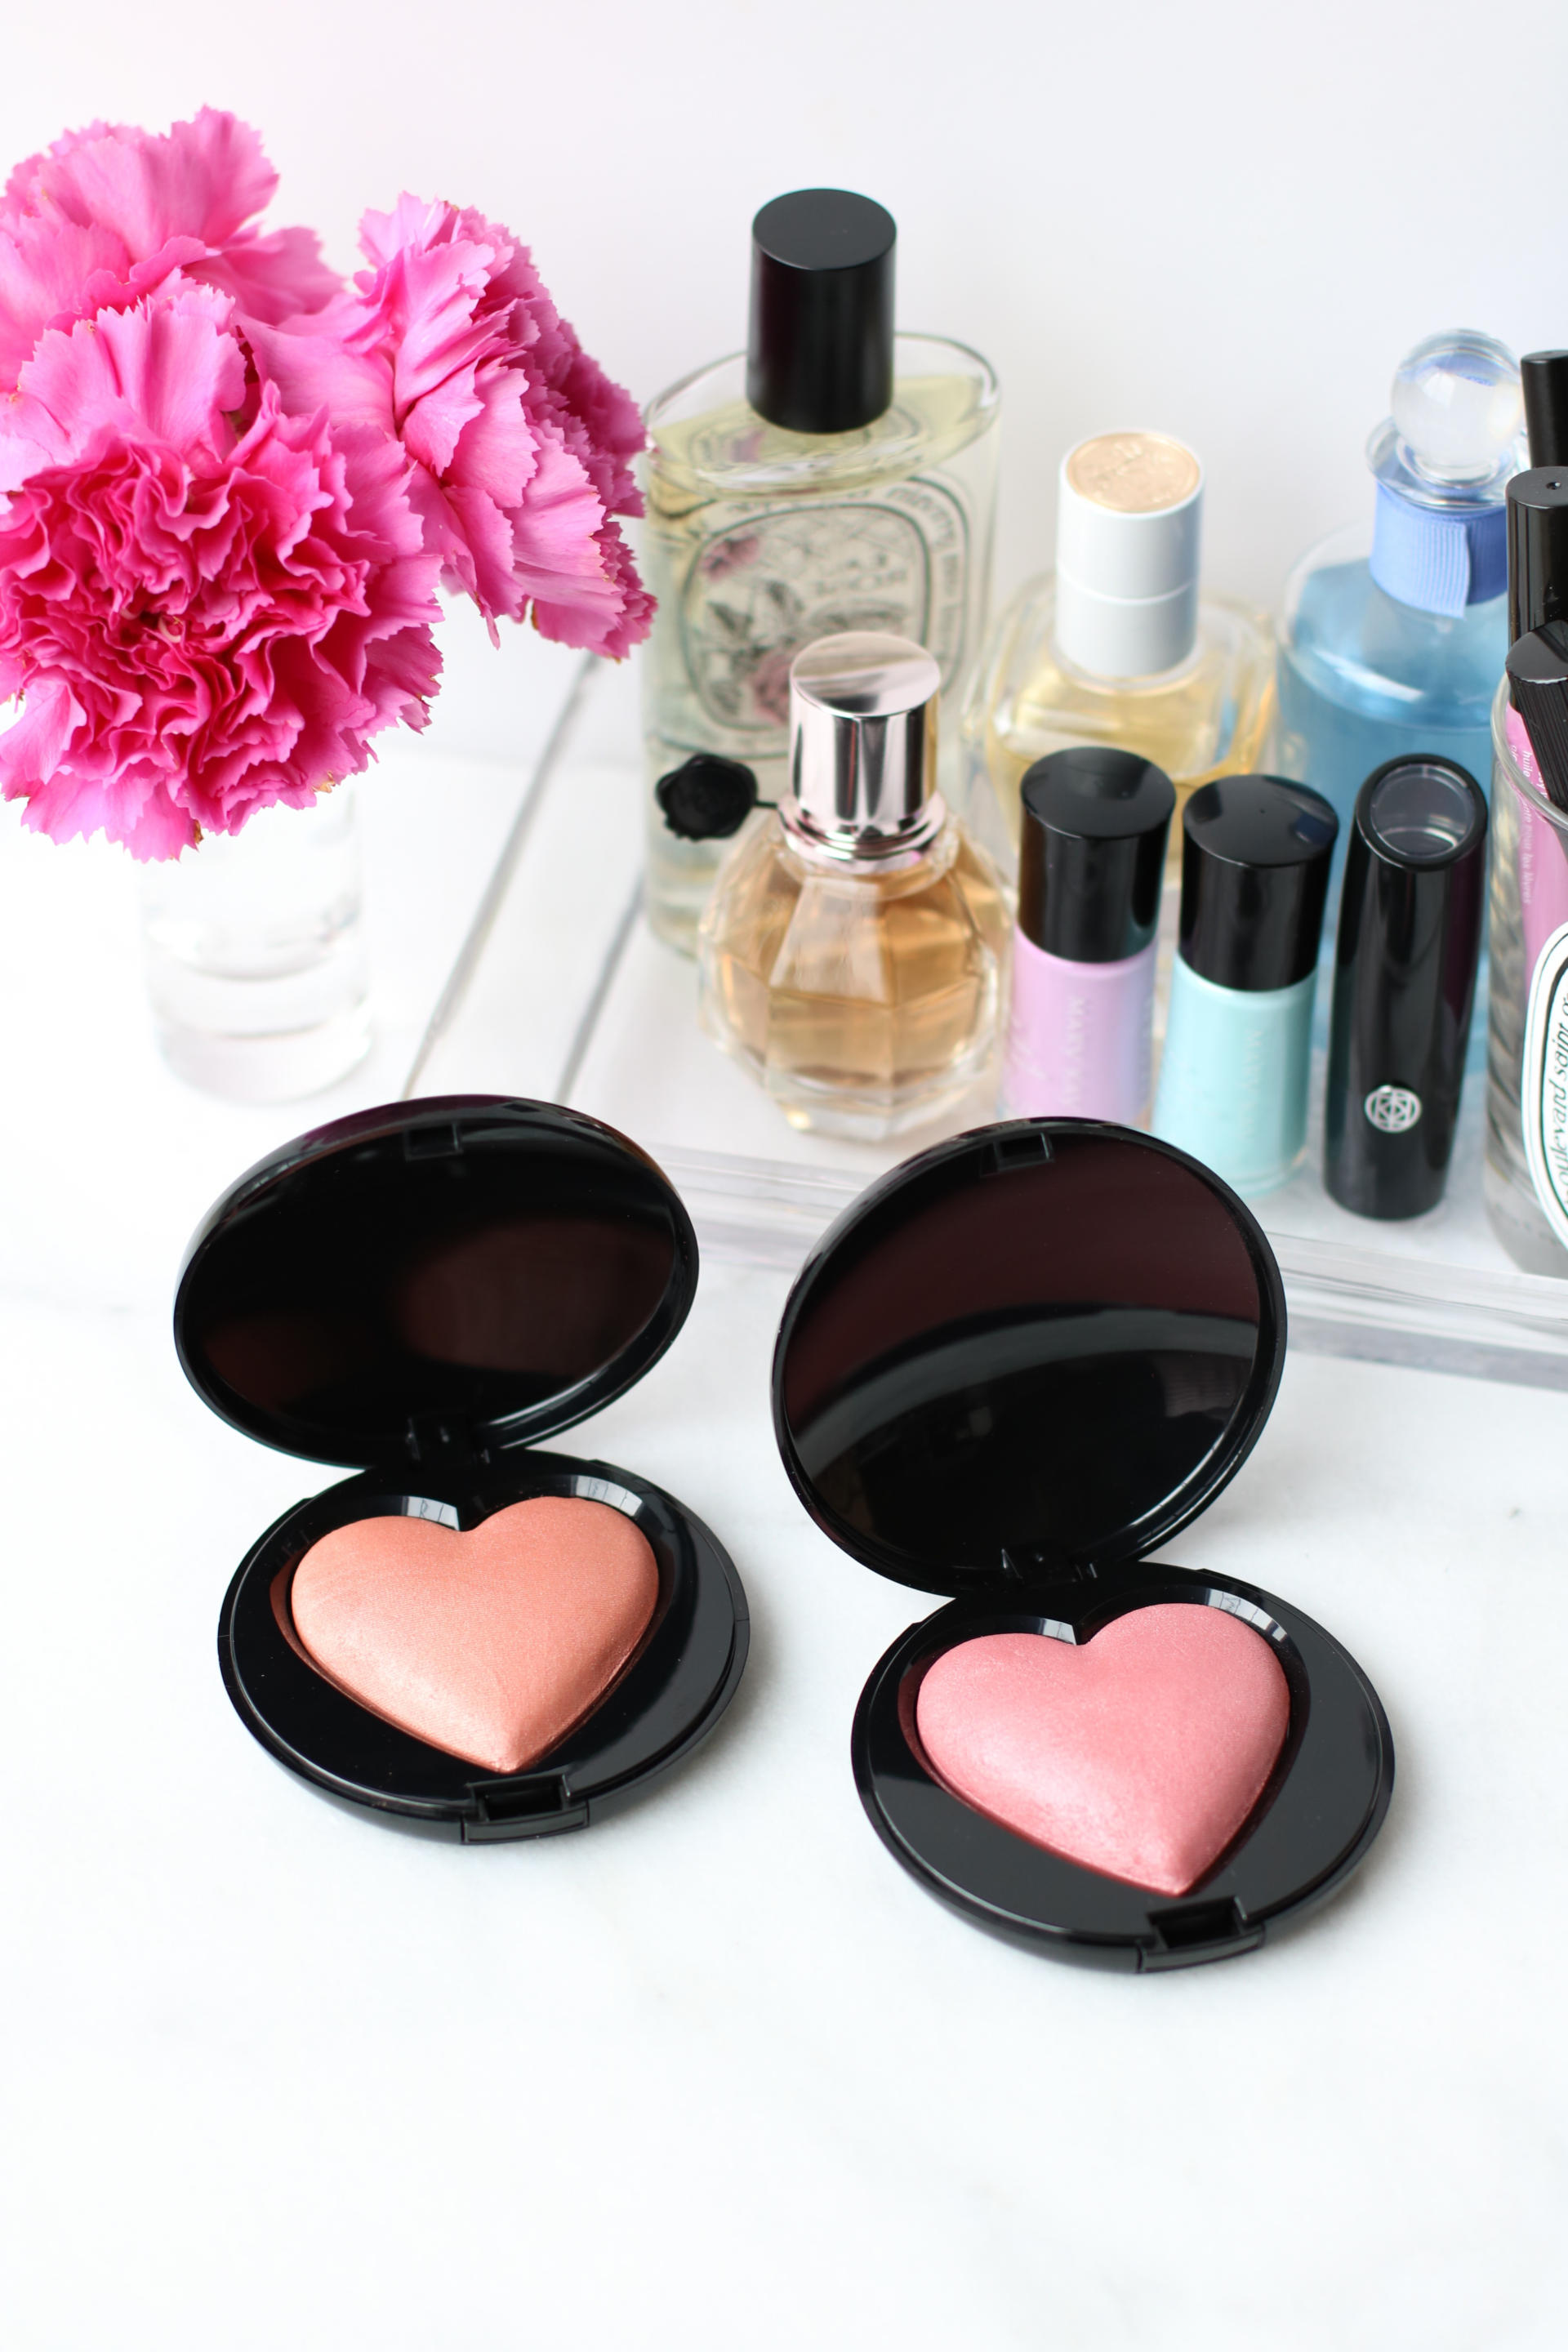 Mary Kay's collection of summer makeup is so pretty and cute - you gotta try them NOW!